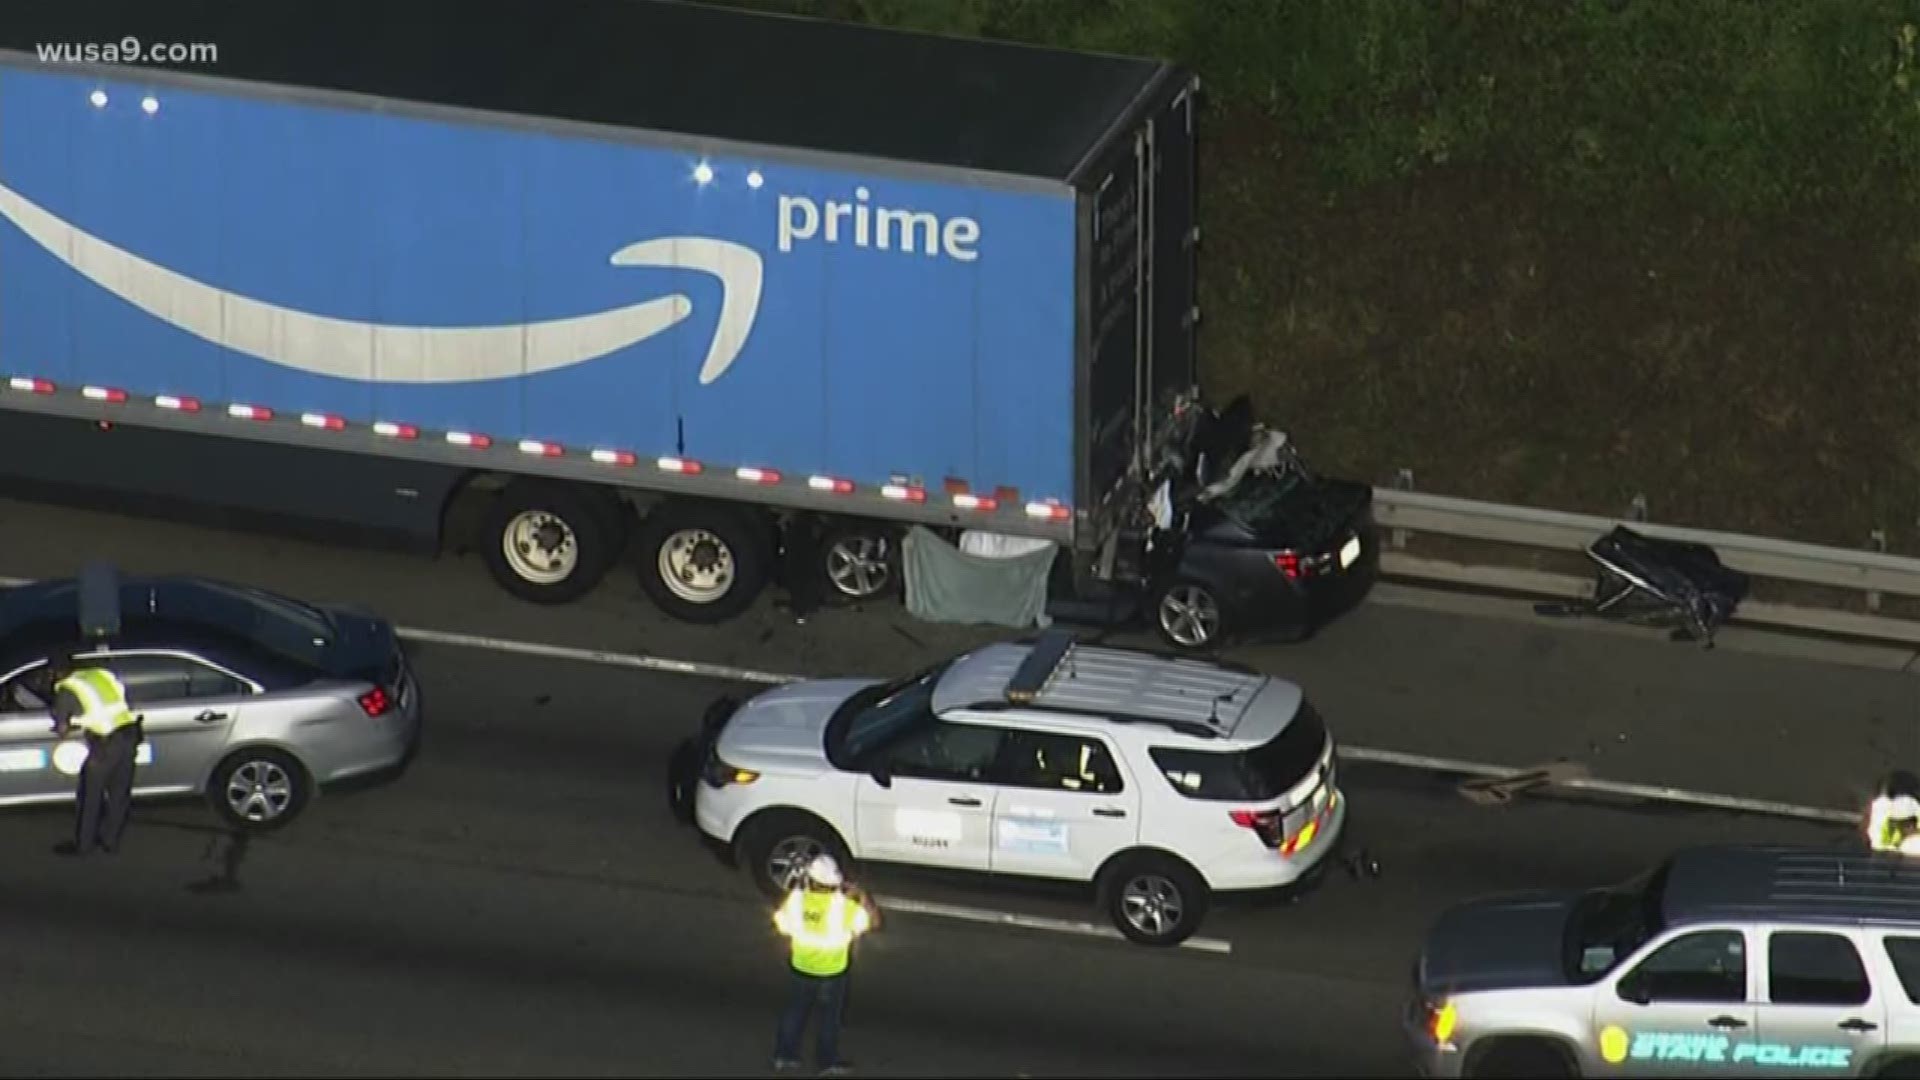 Two lanes are closed on I-95 South near Lorton Road in Virginia after a car went under an Amazon Prime tractor trailer Wednesday morning.